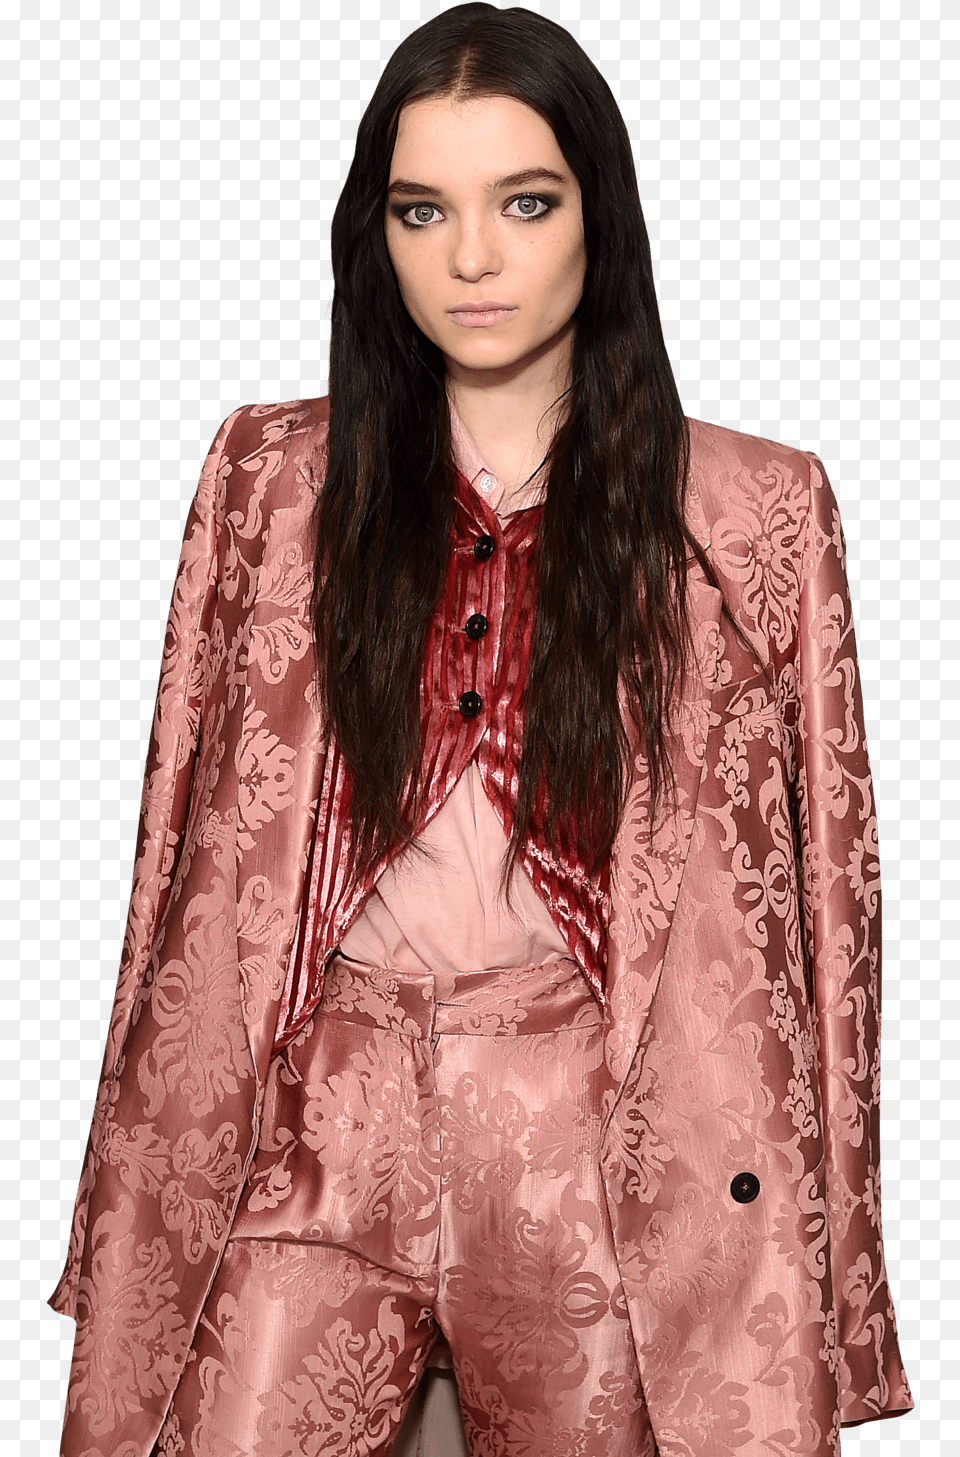 Hanna Amazon Esme Creed Miles, Adult, Suit, Person, Jacket Png Image